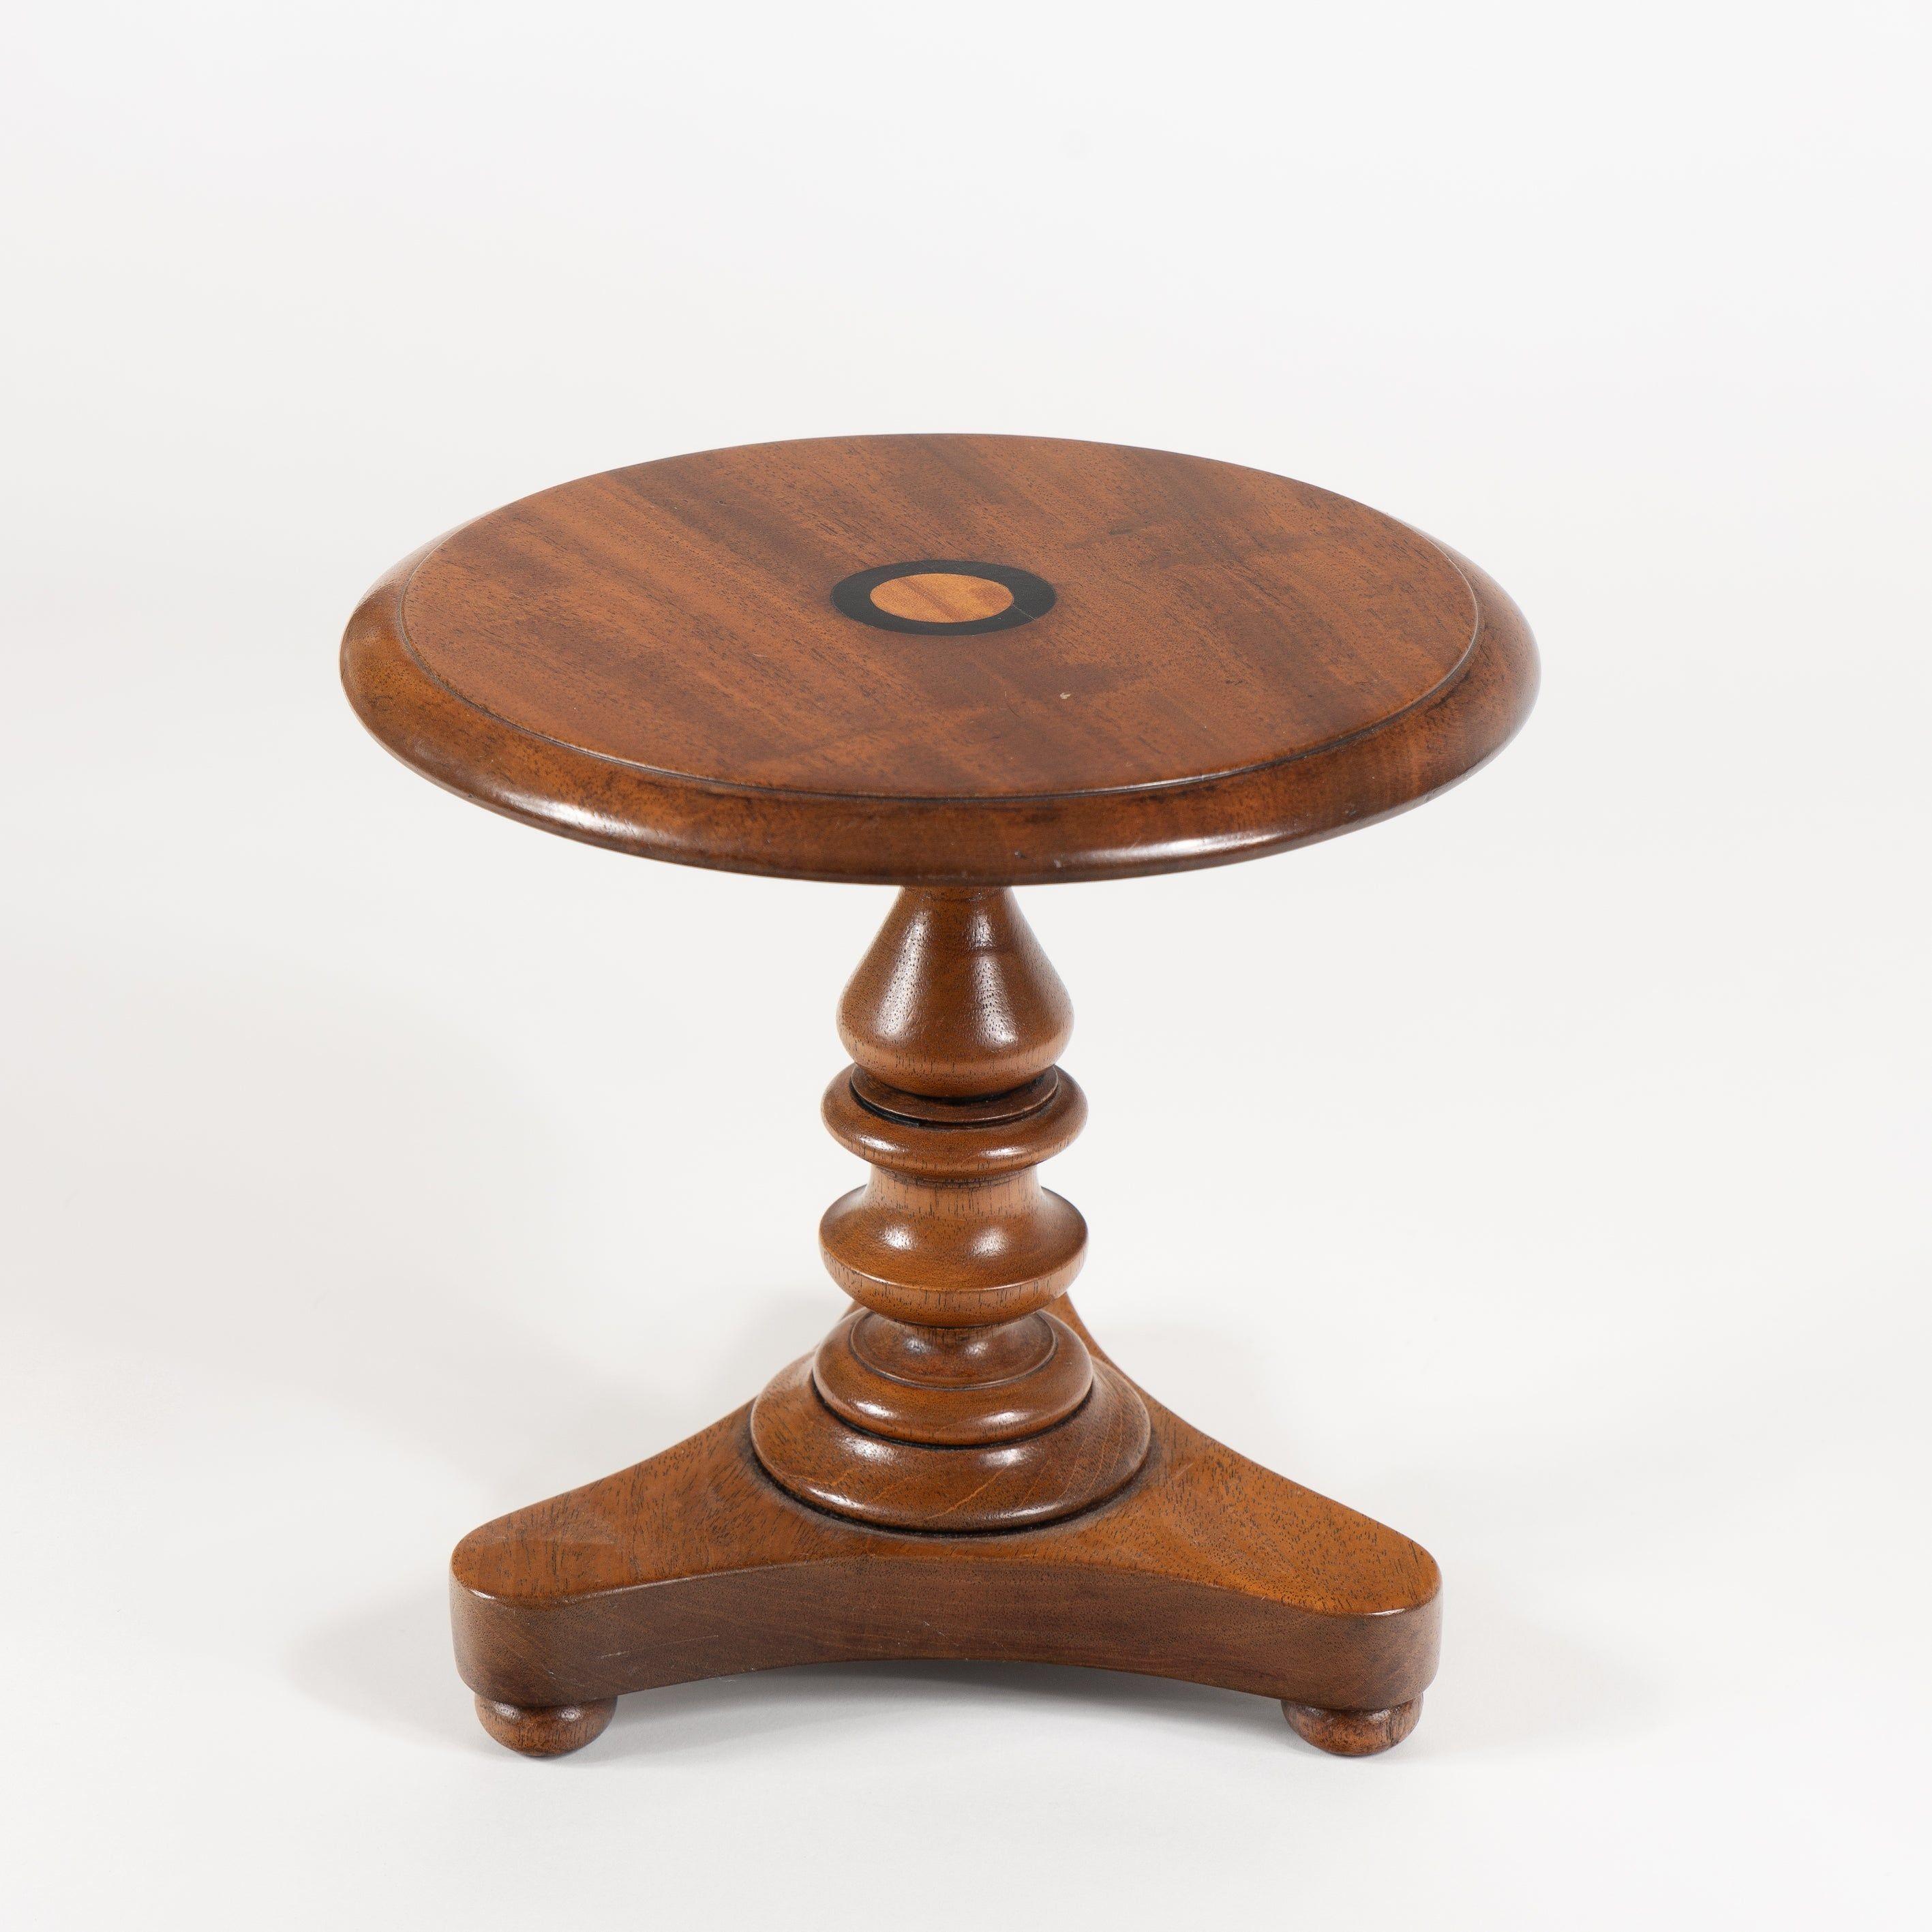 Mid-19th Century American Miniature Tilt Top Miniature Table/Candle Stand by Thomas Clowney, 1840